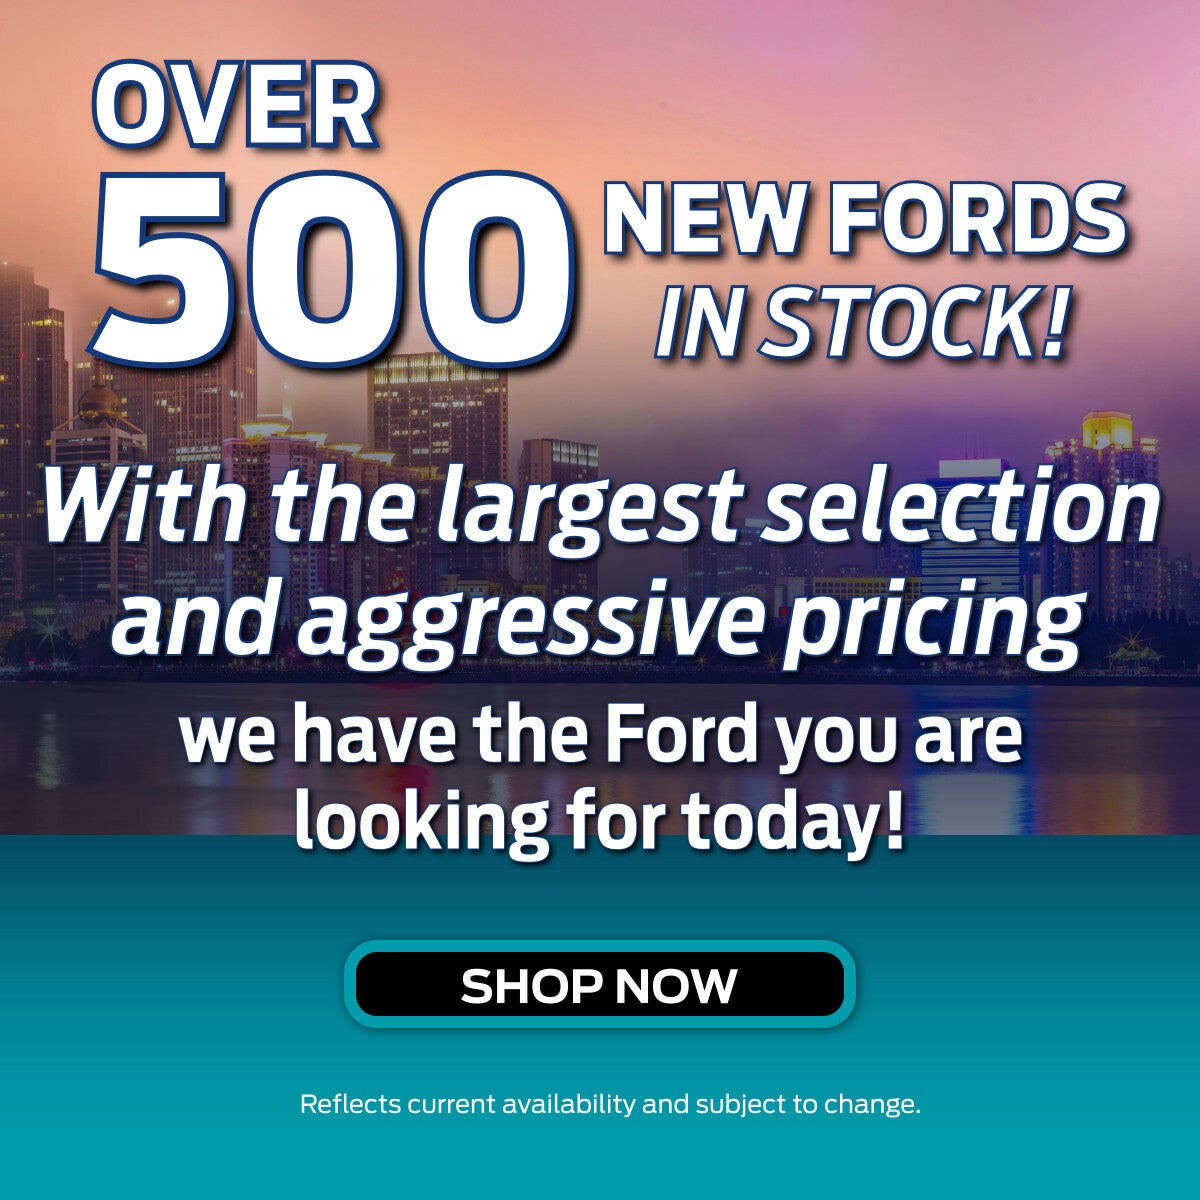 Over 500 vehicles in stock